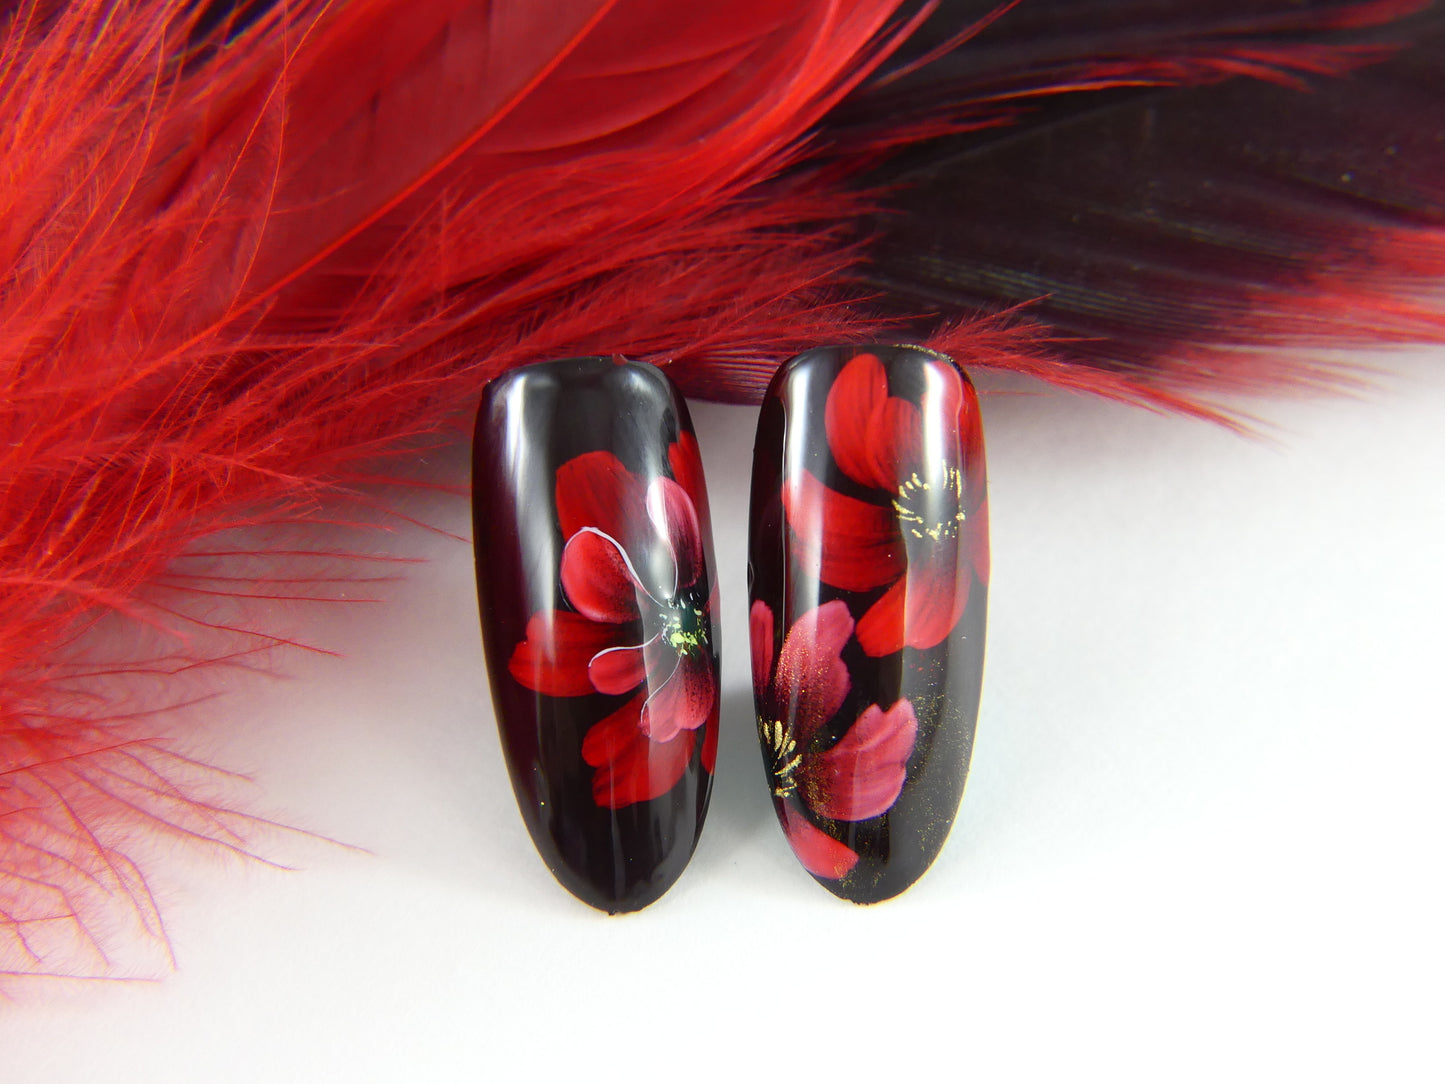 So Jelly Gel Polish - Red - My Little Nail Art Shop